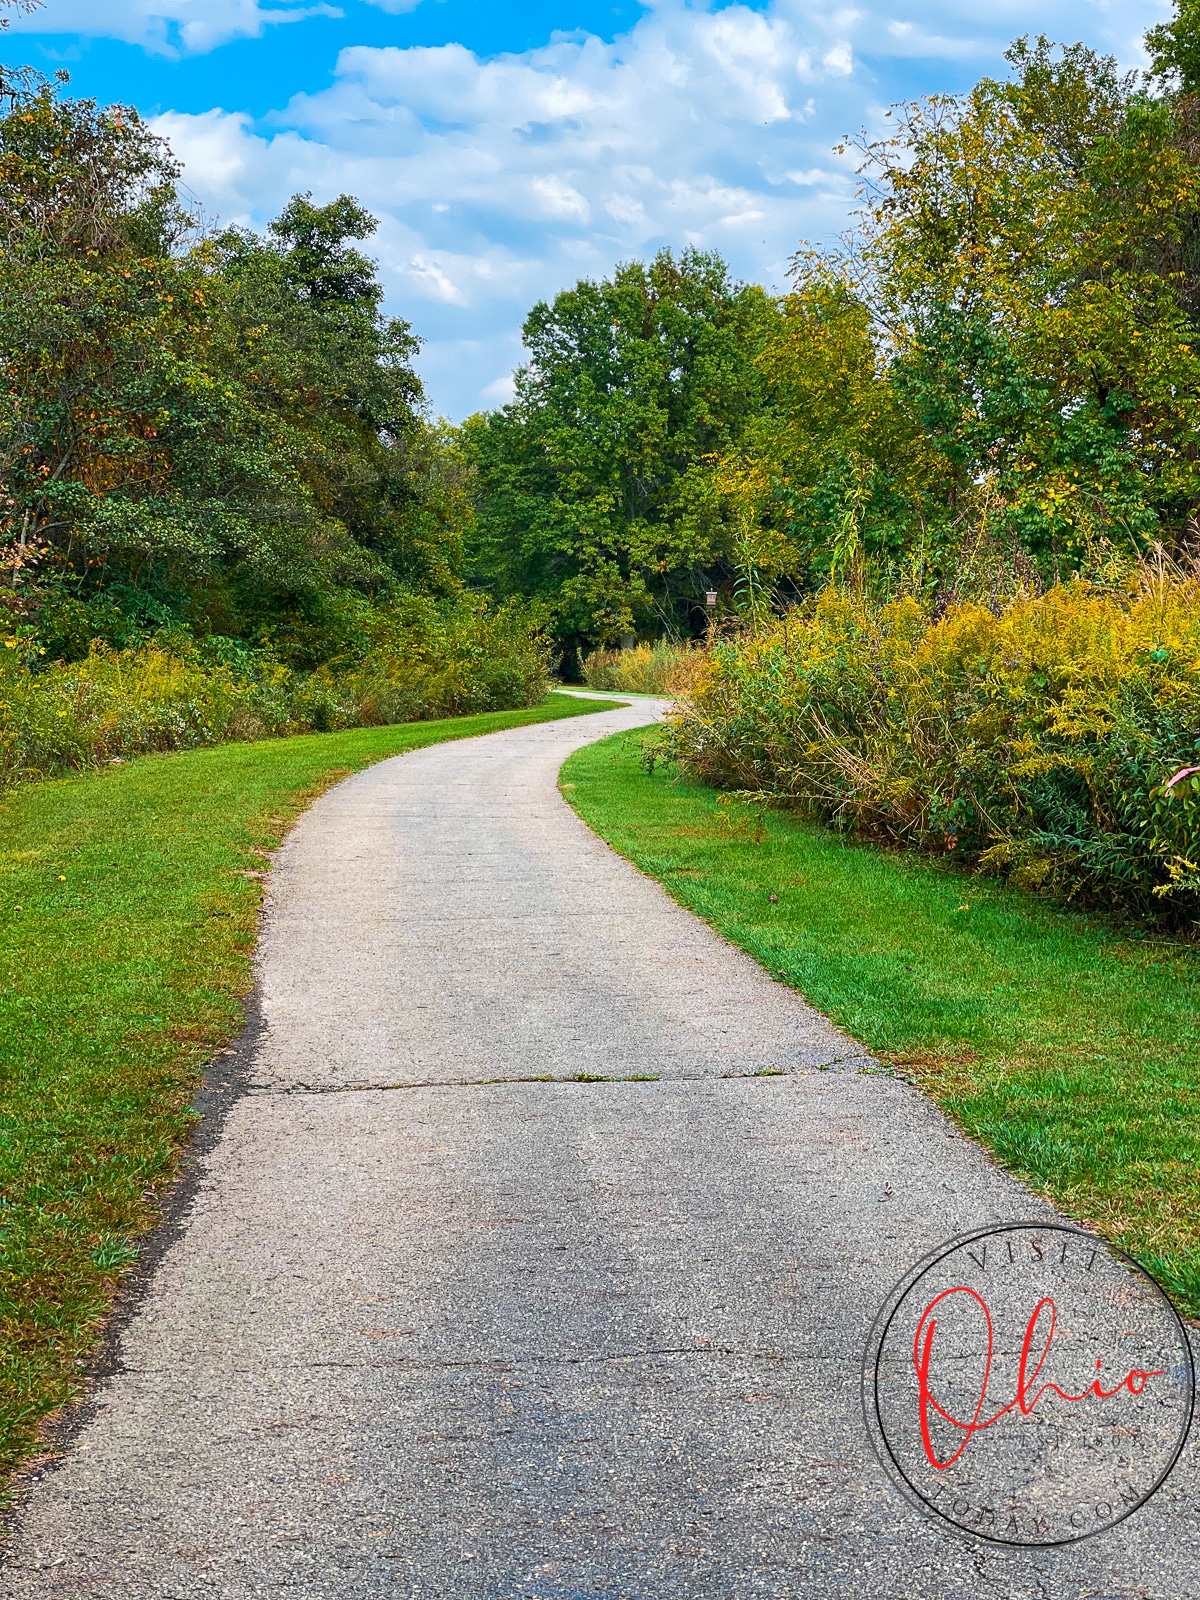 paved path with green grass and green trees to the sides. Photo credit: Cindy Gordon of VisitOhioToday.com